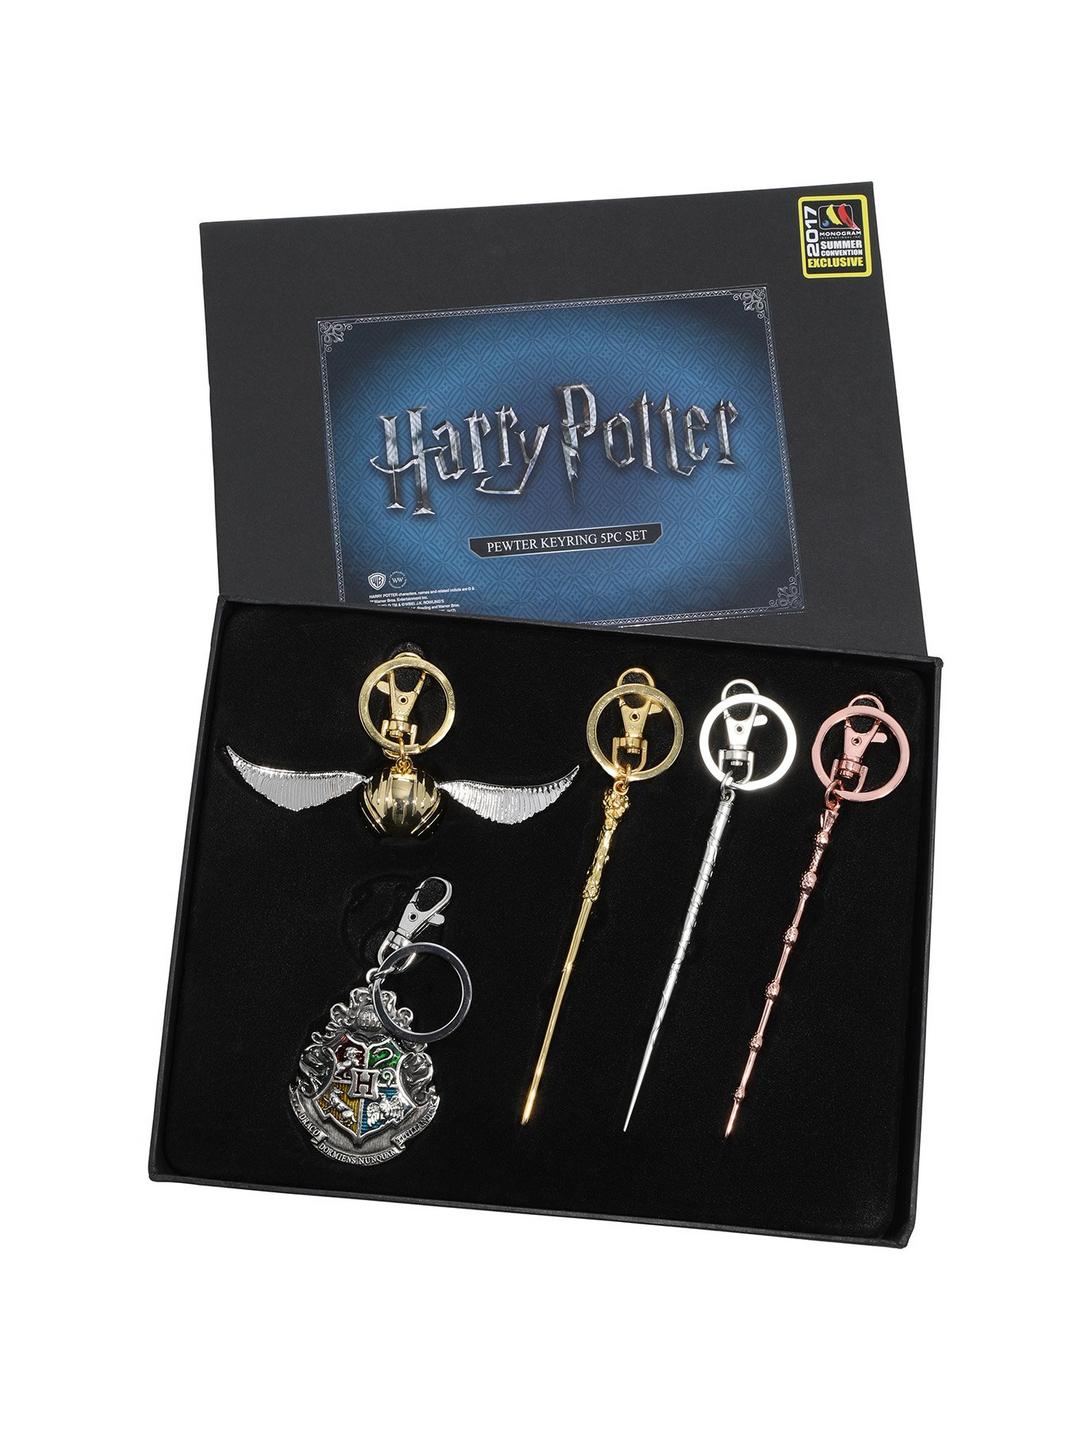 Harry Potter Wand Key Chain Set 2017 Summer Convention Exclusive, , hi-res